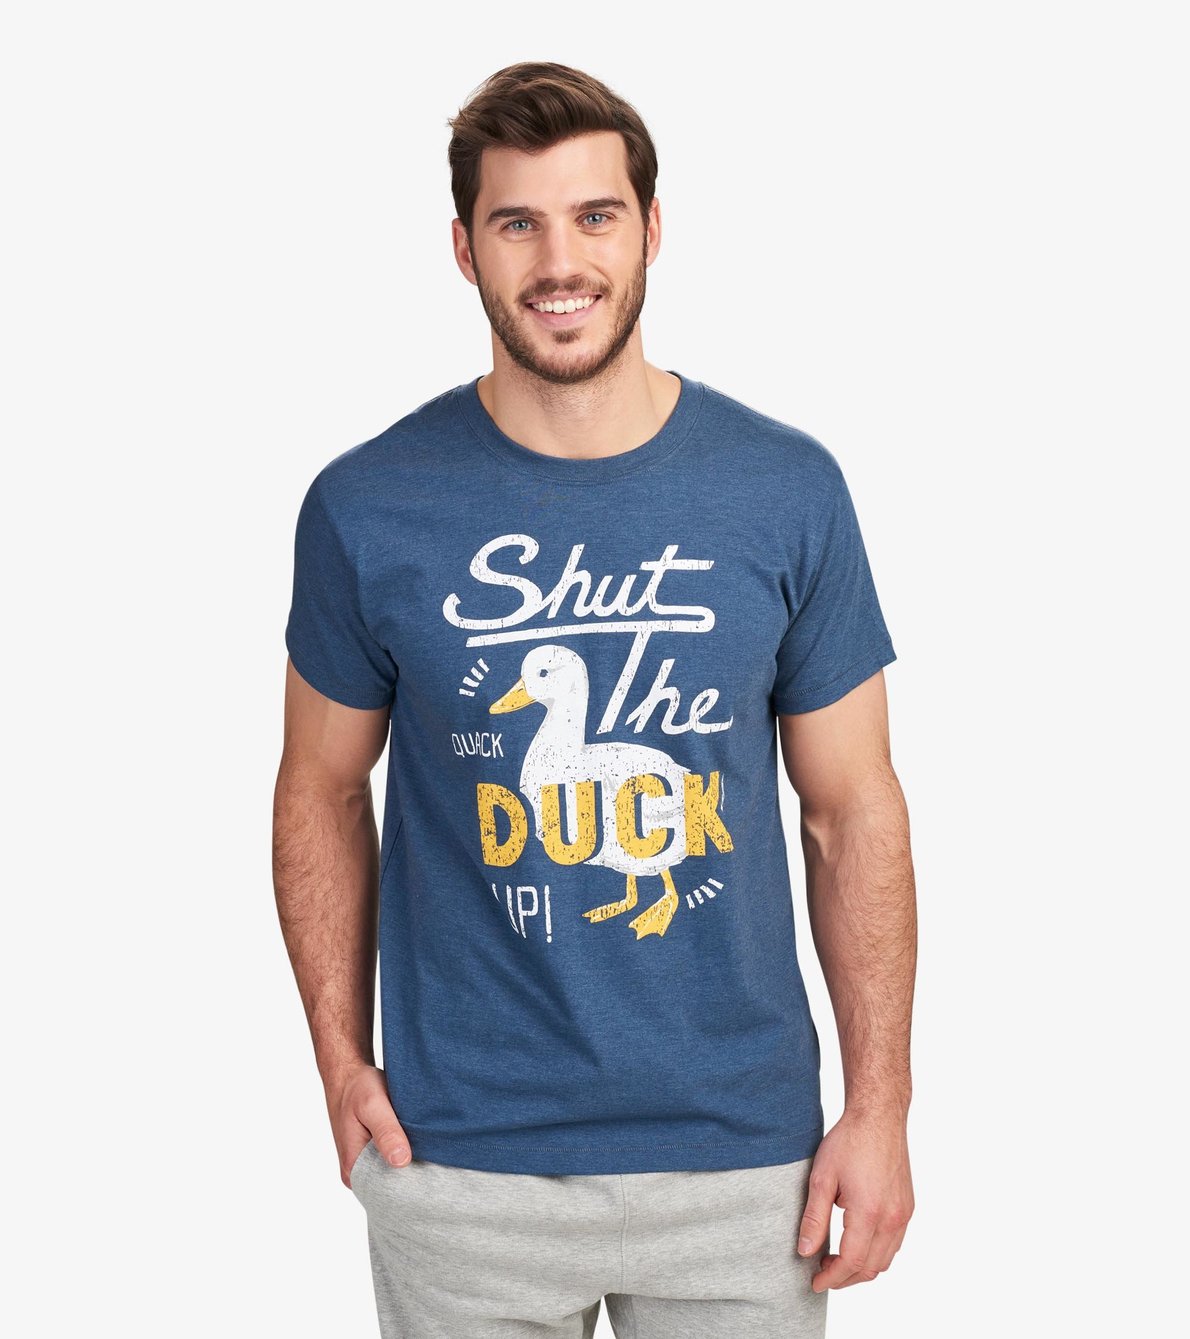 View larger image of Shut The Duck Up Men's Tee